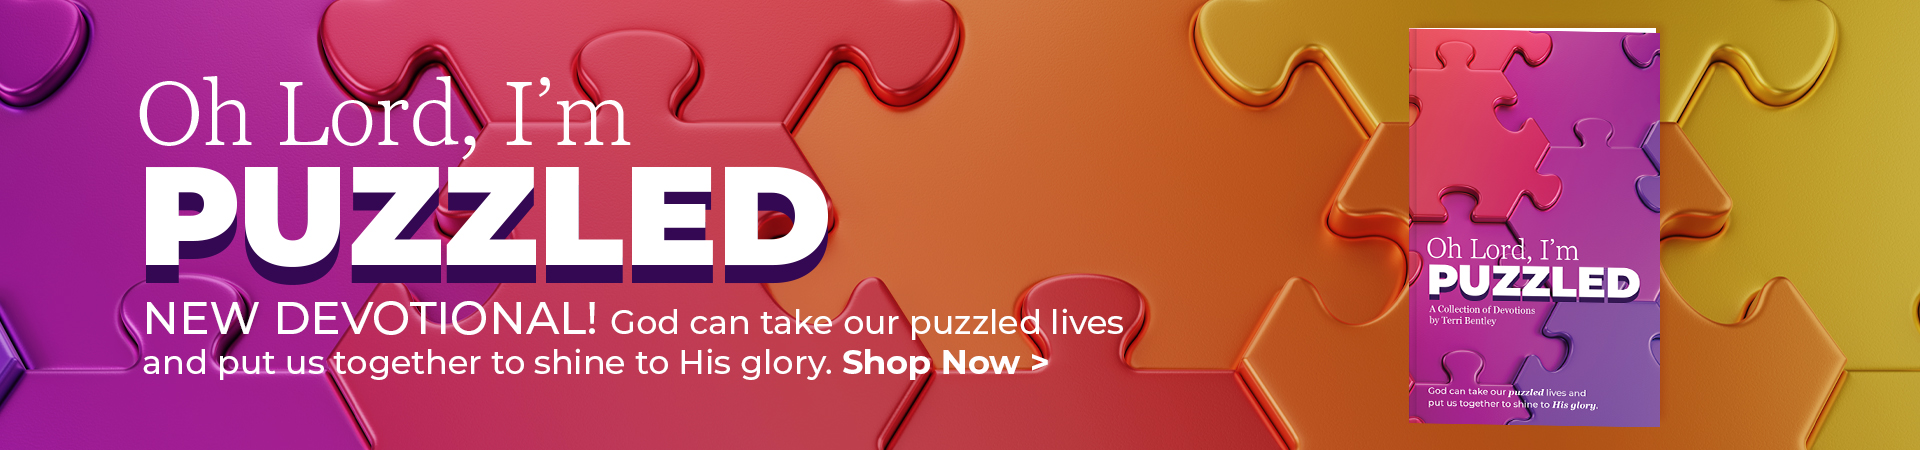 Oh Lord, I'm Puzzled! New devotional: Shop Now.